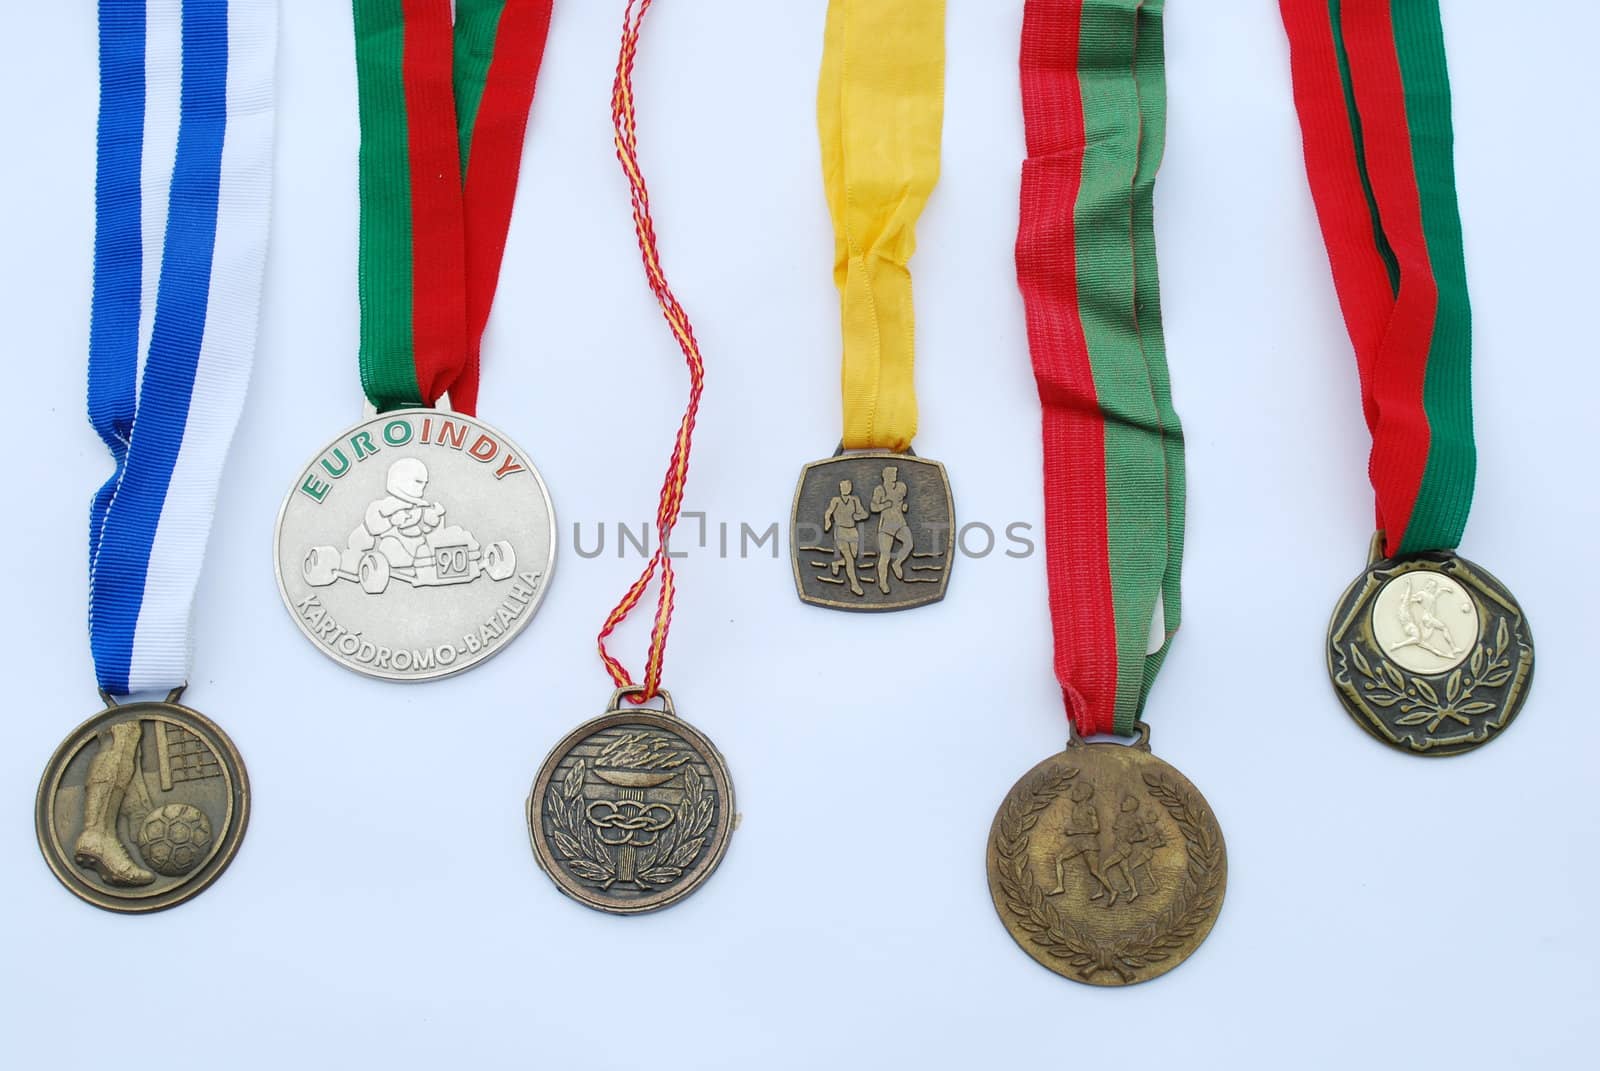 photo of a collection of medal awards from a sport competition